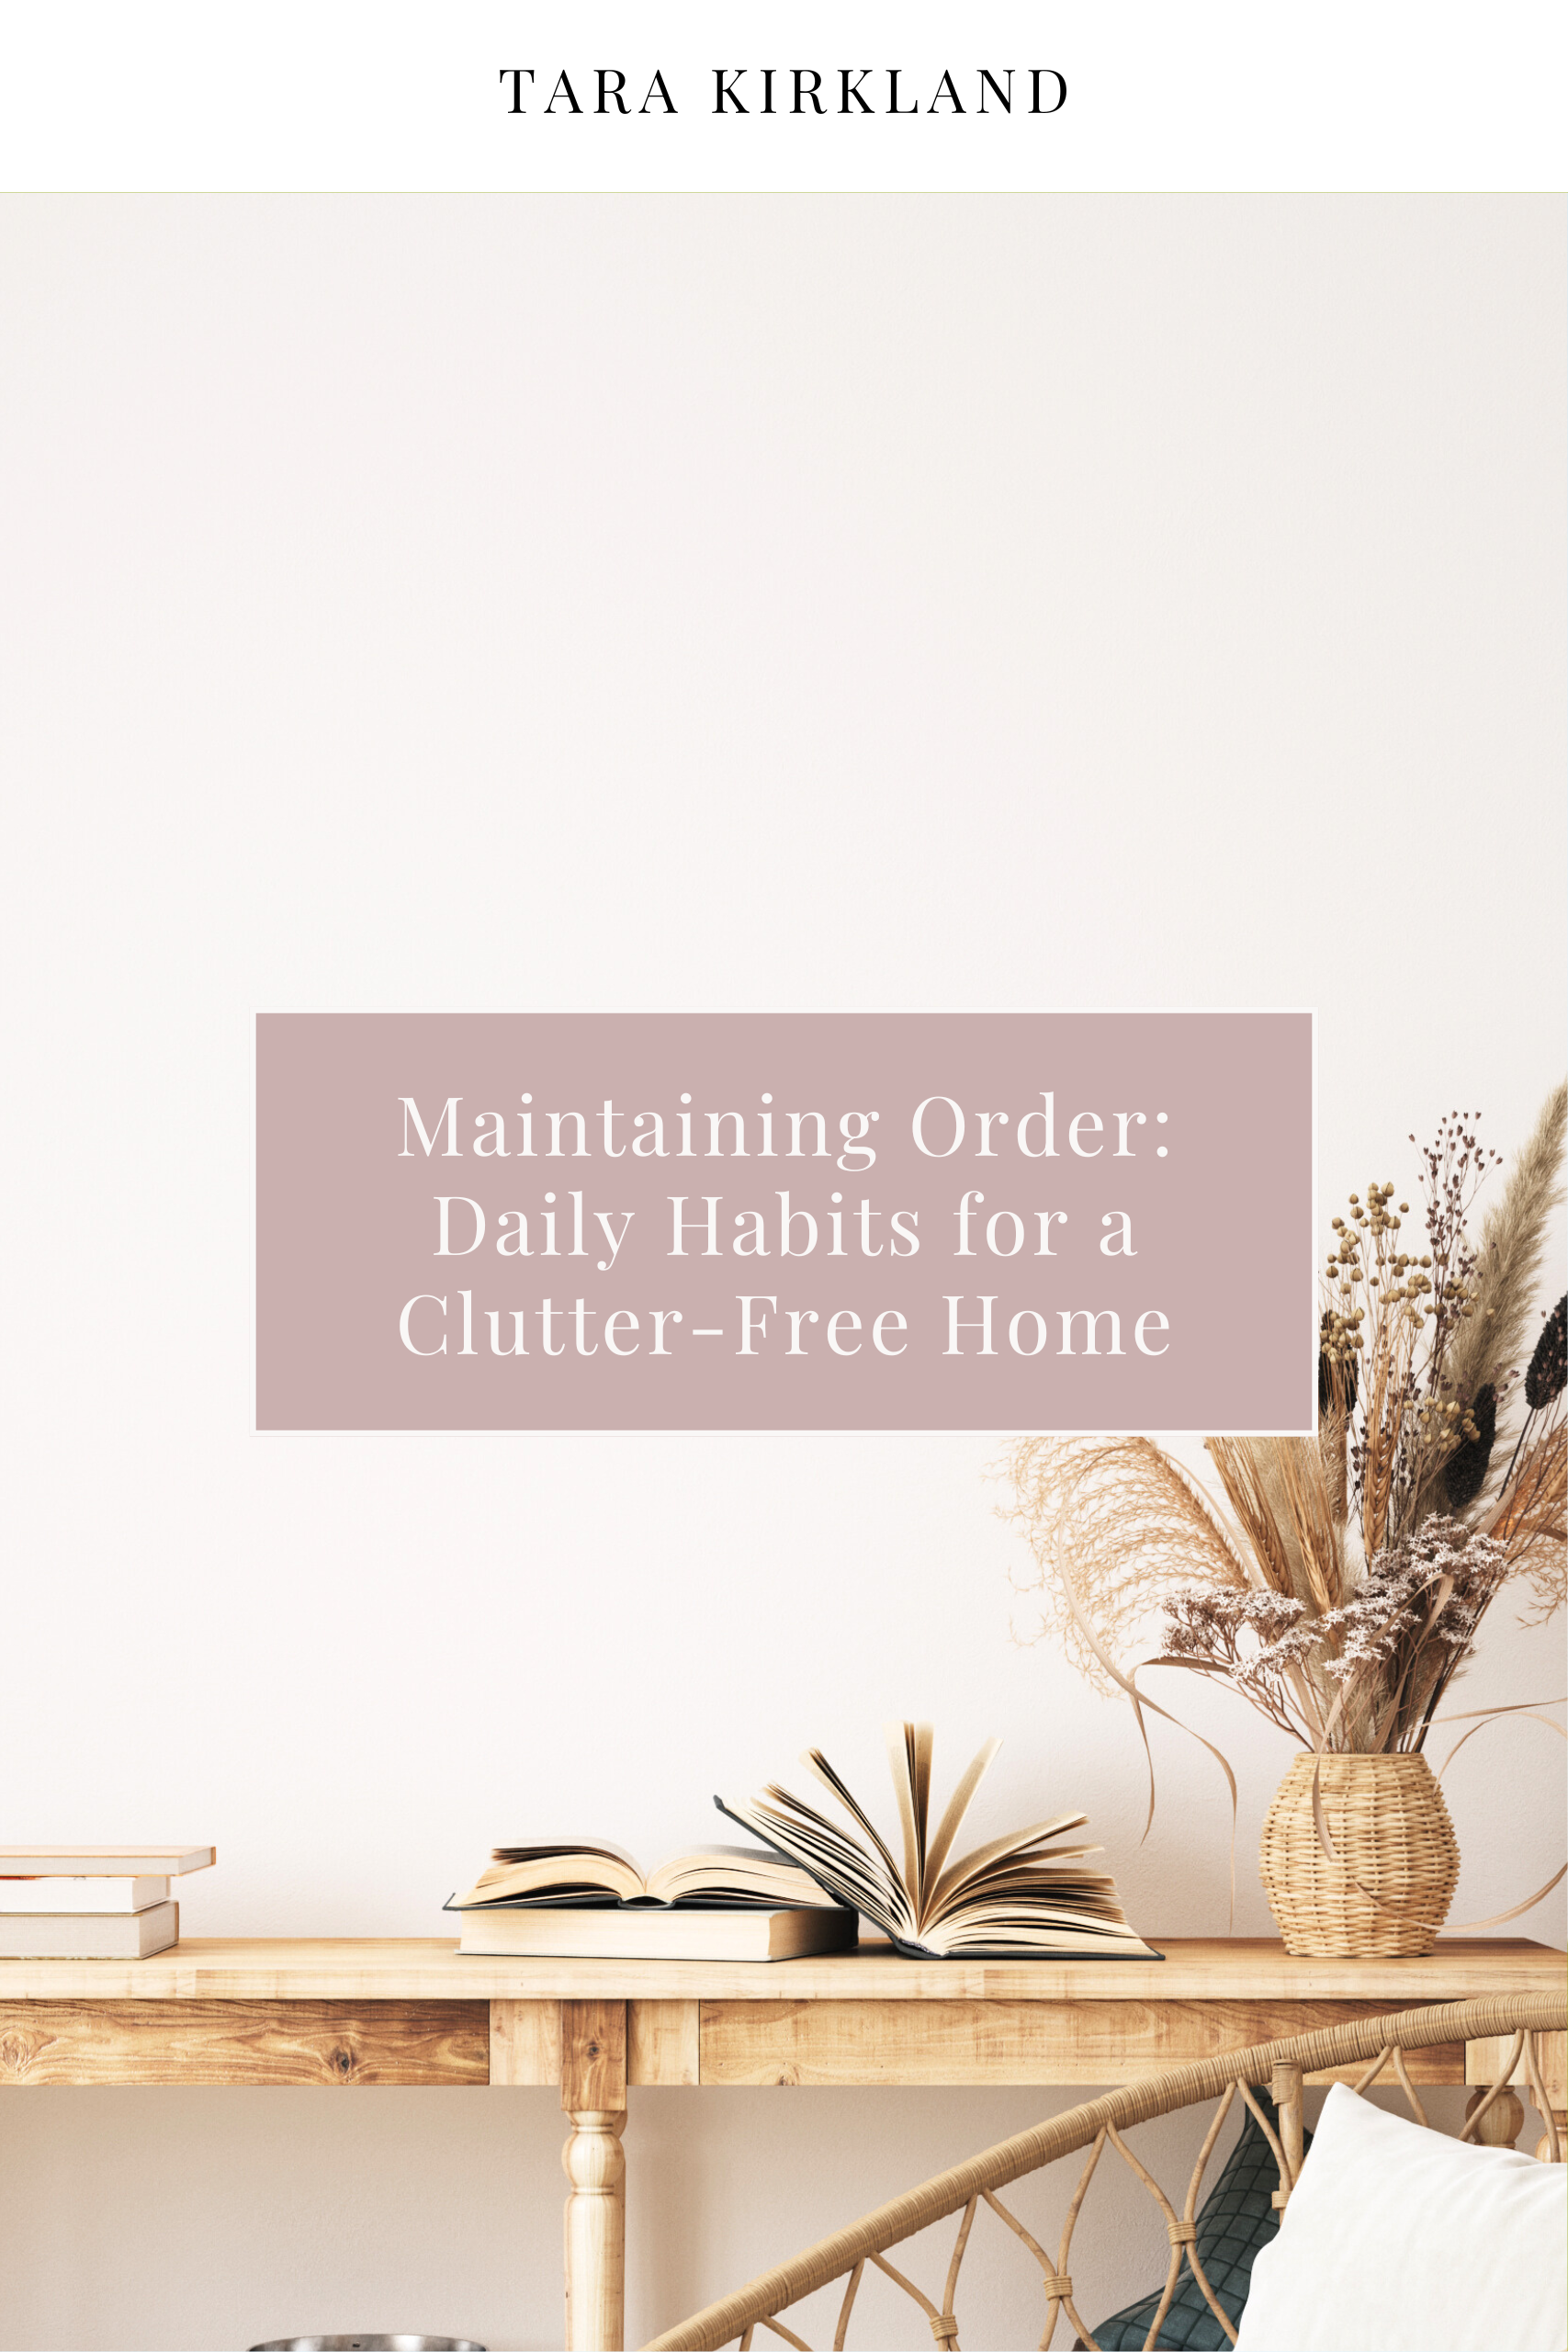 Maintaining Order: Daily Habits for a Clutter-Free Home